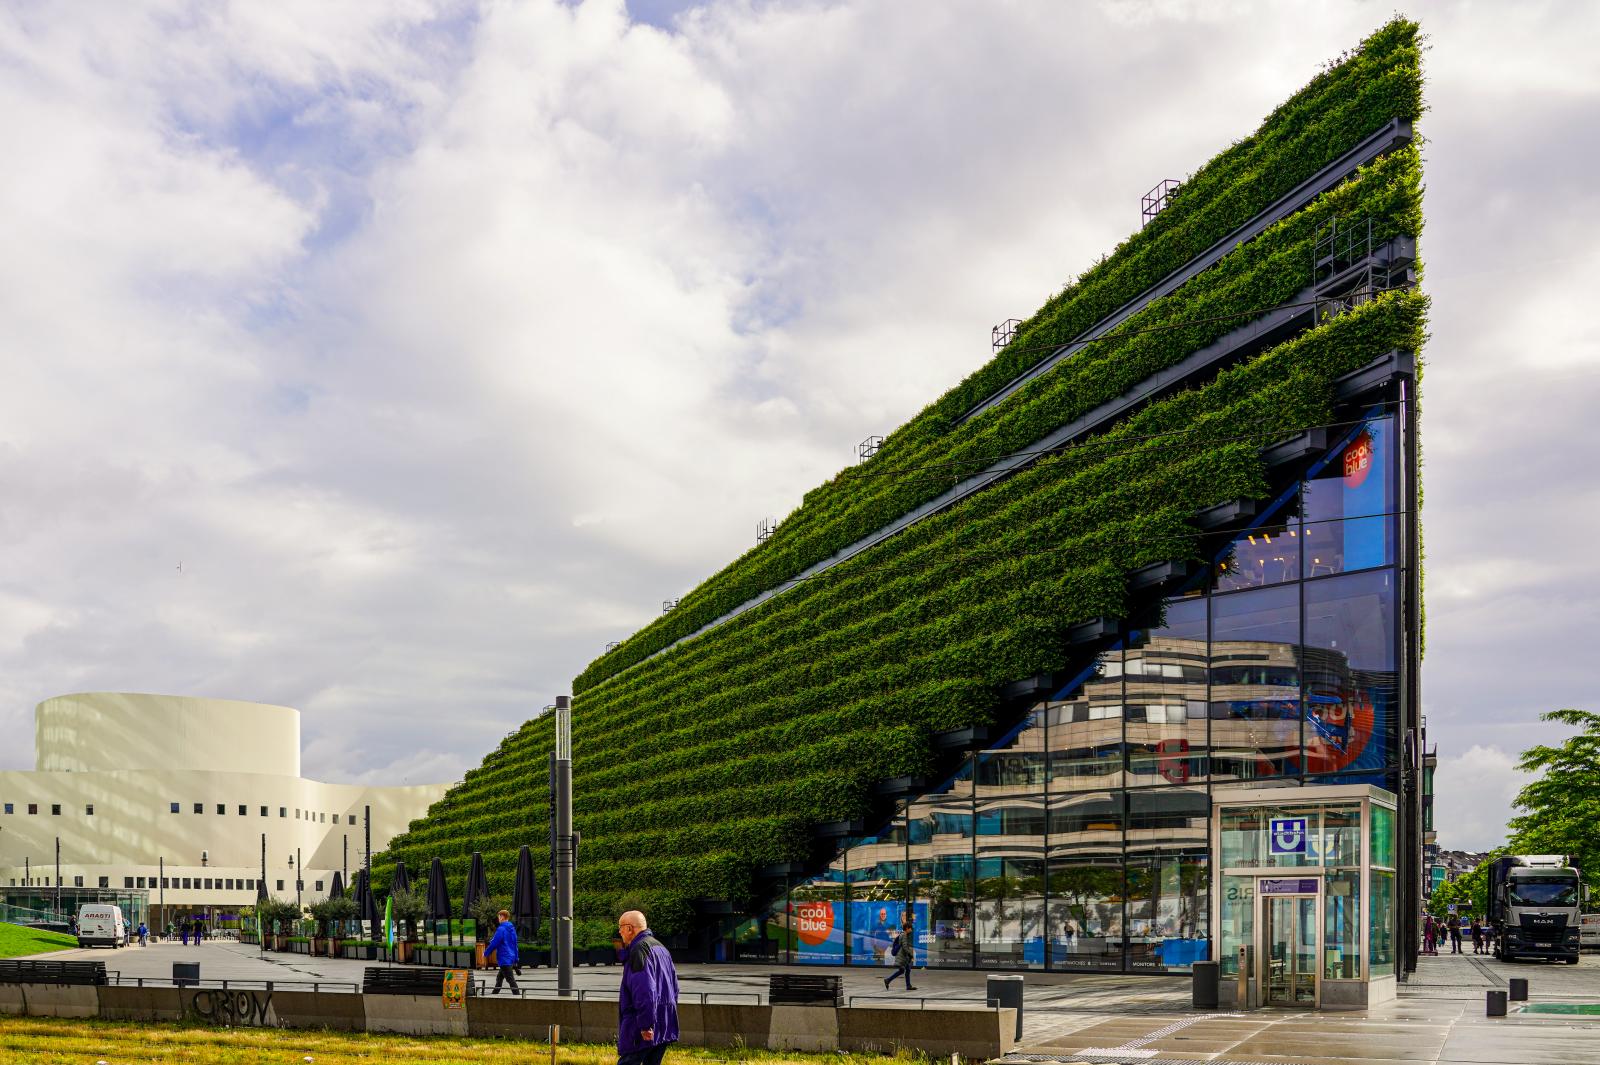 Europe's largest Building with a green Facade to improve the City's Climate